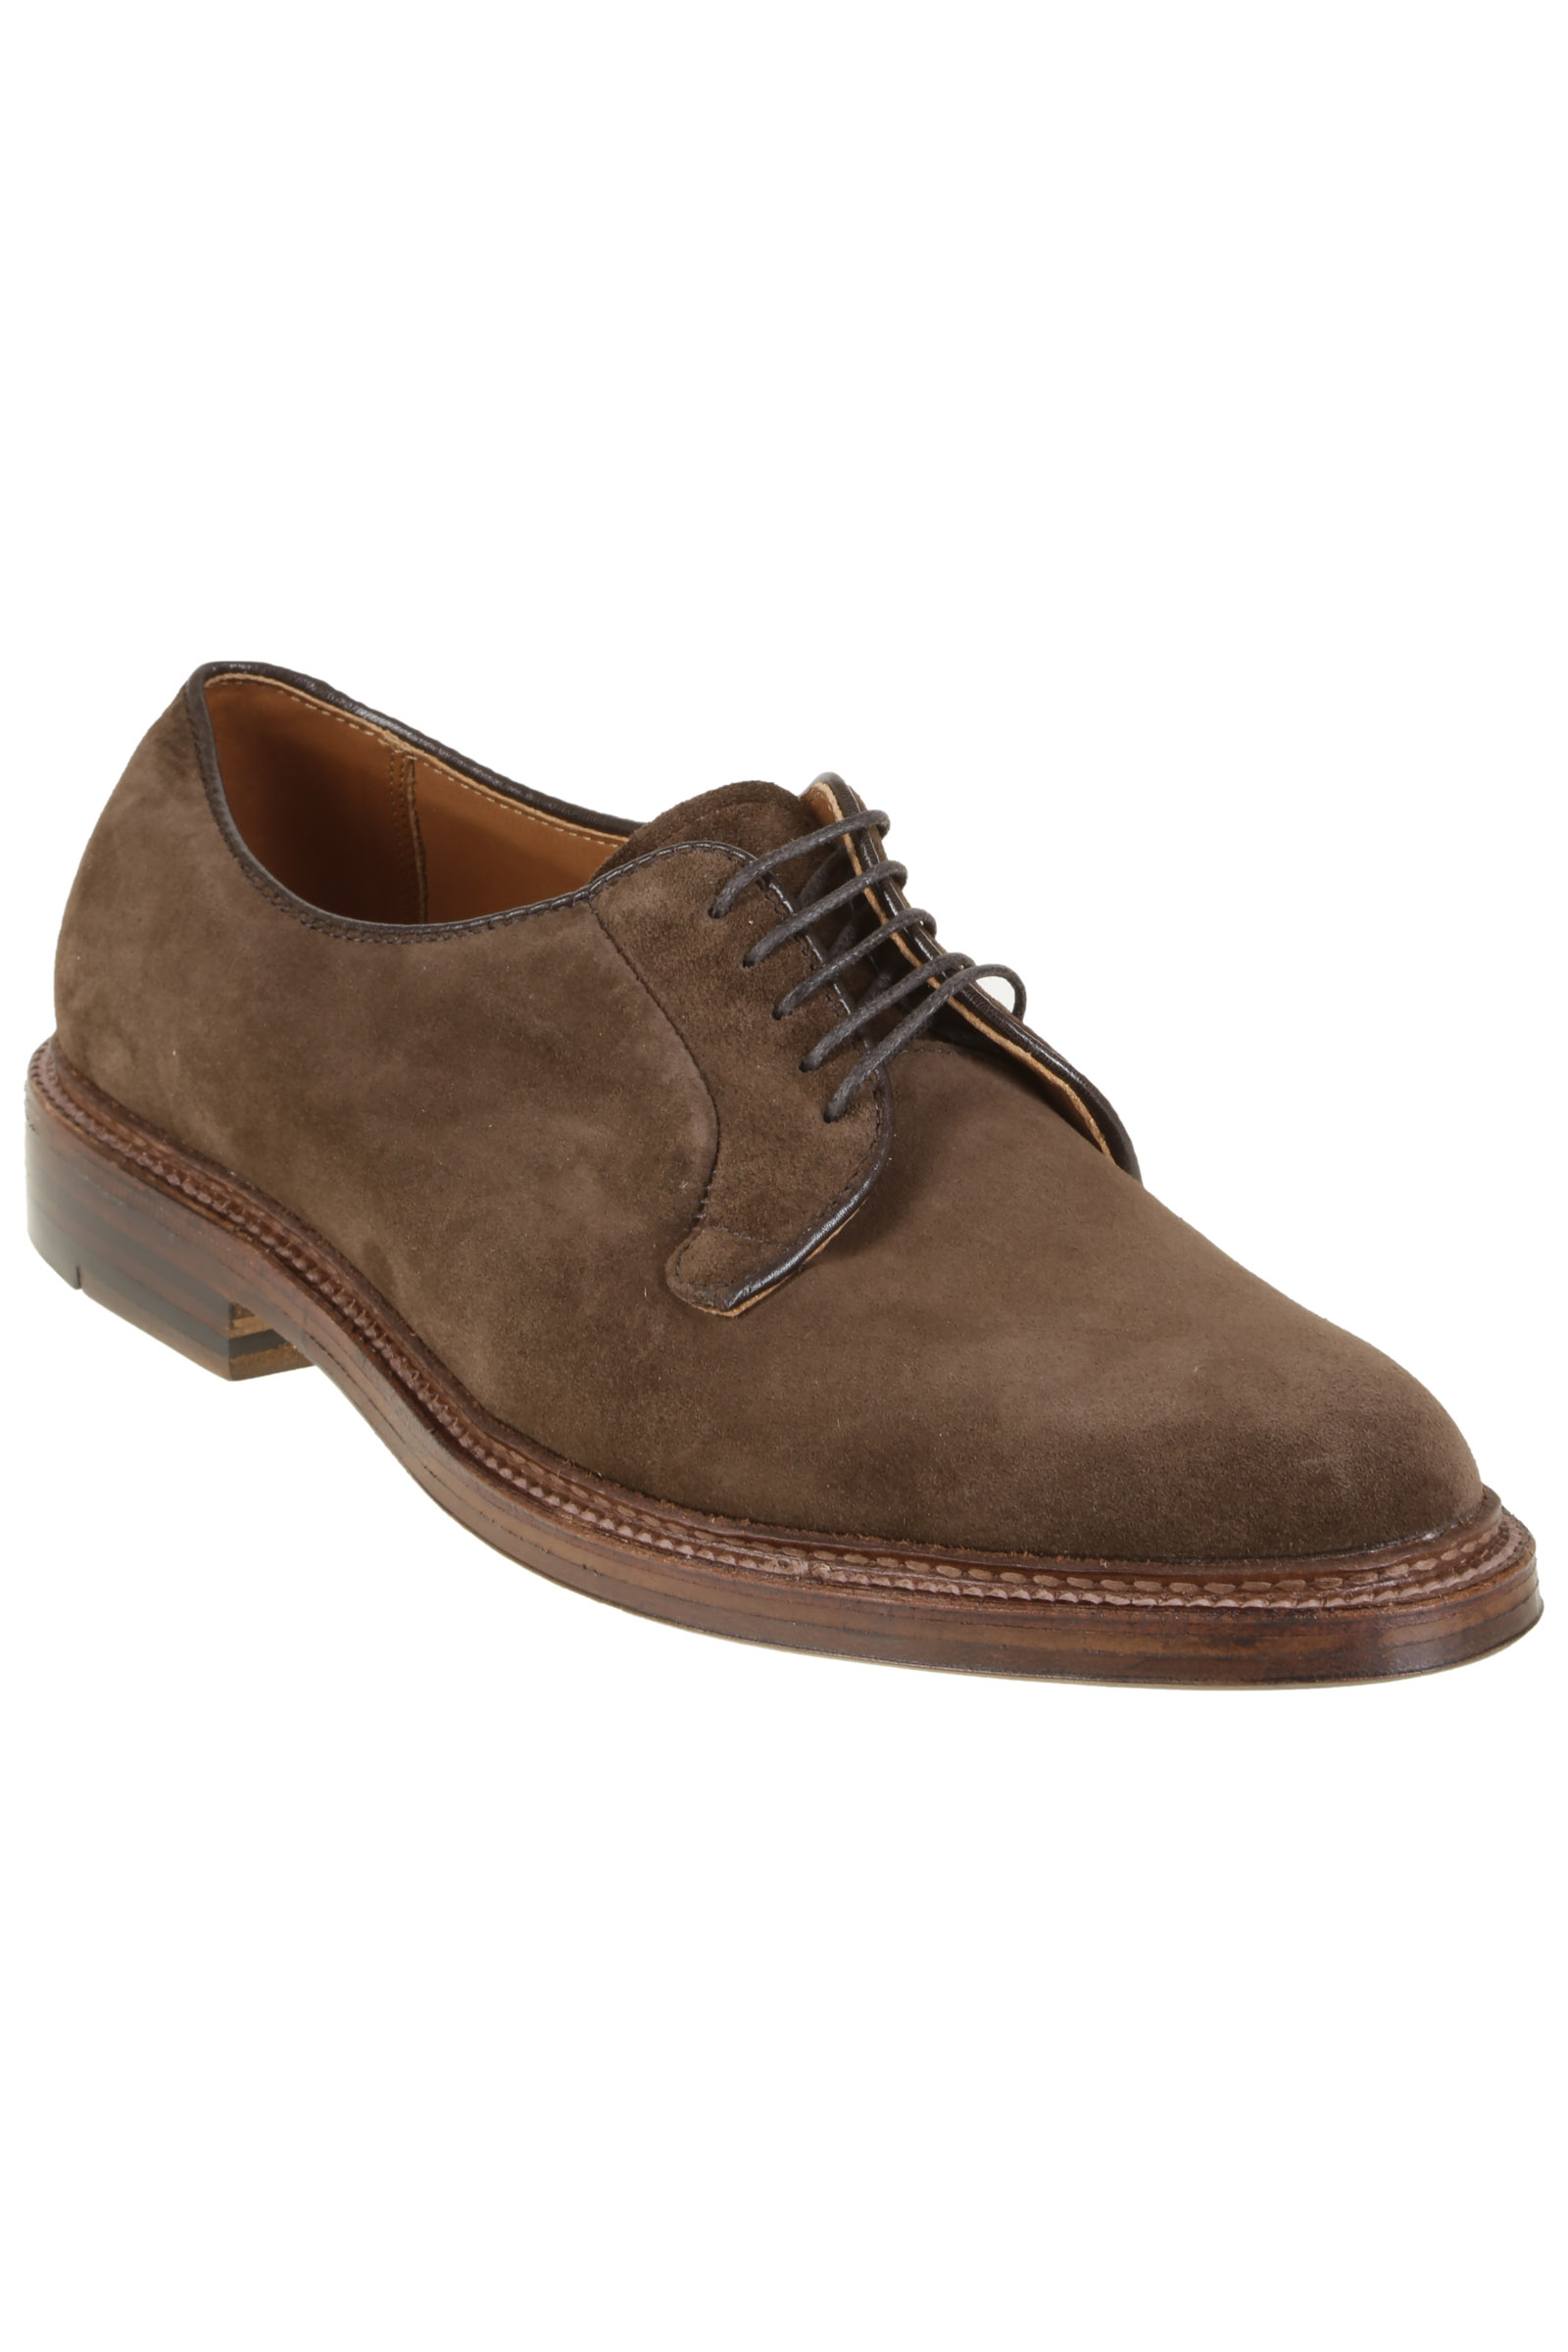 Picture of Alden | 9503 Derby Fitting E